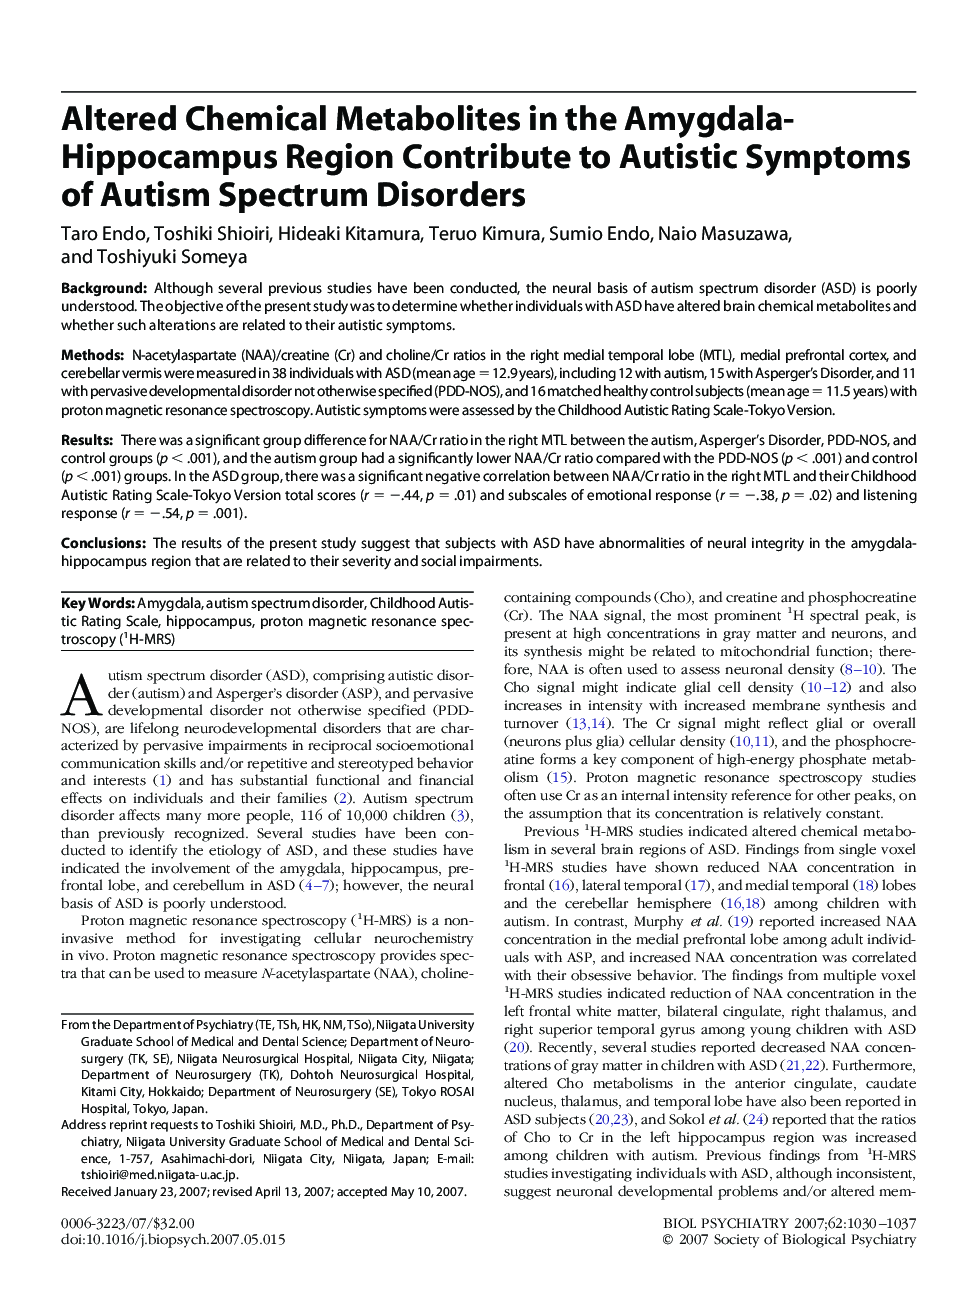 Altered Chemical Metabolites in the Amygdala-Hippocampus Region Contribute to Autistic Symptoms of Autism Spectrum Disorders